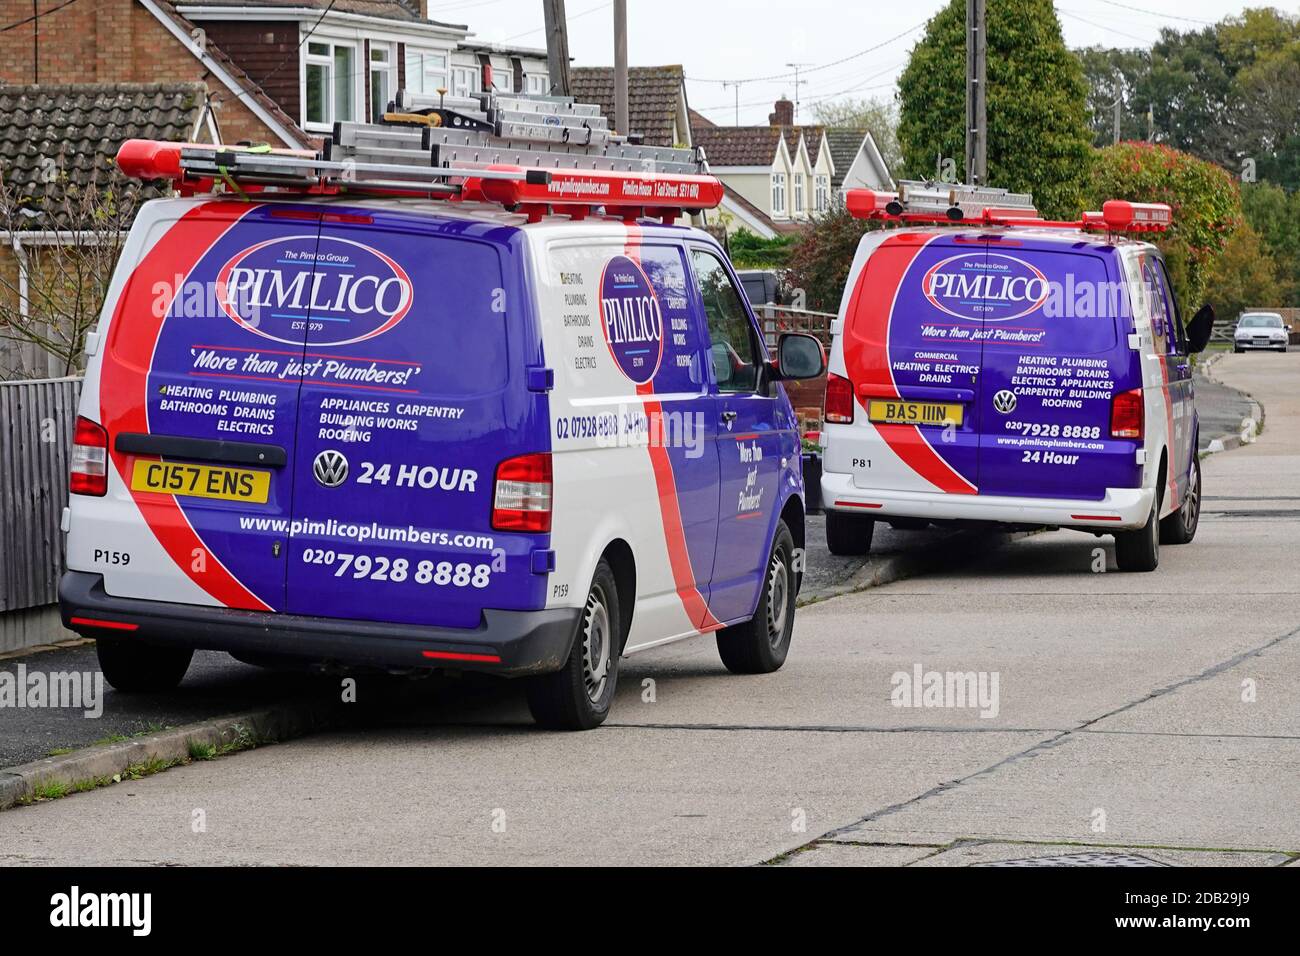 Pimlico plumbers group service business vans outside home vehicle graphics advertising company care services for property maintenance work England UK Stock Photo